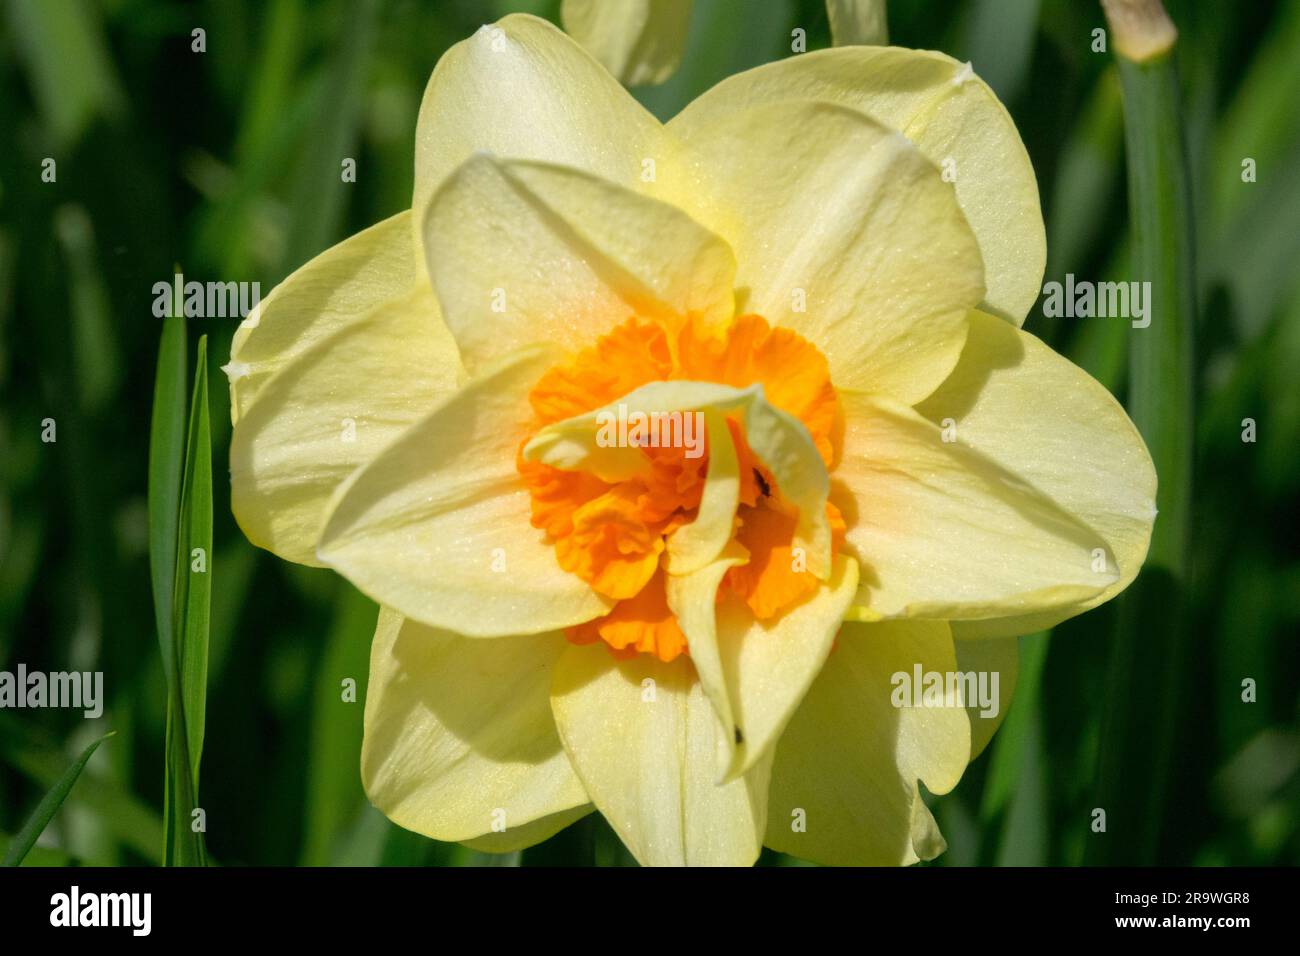 Daffodil, Narcissus, Flower, Daffodil flower, Yellow, Orange, Narcissus 'Double Fashion' Stock Photo